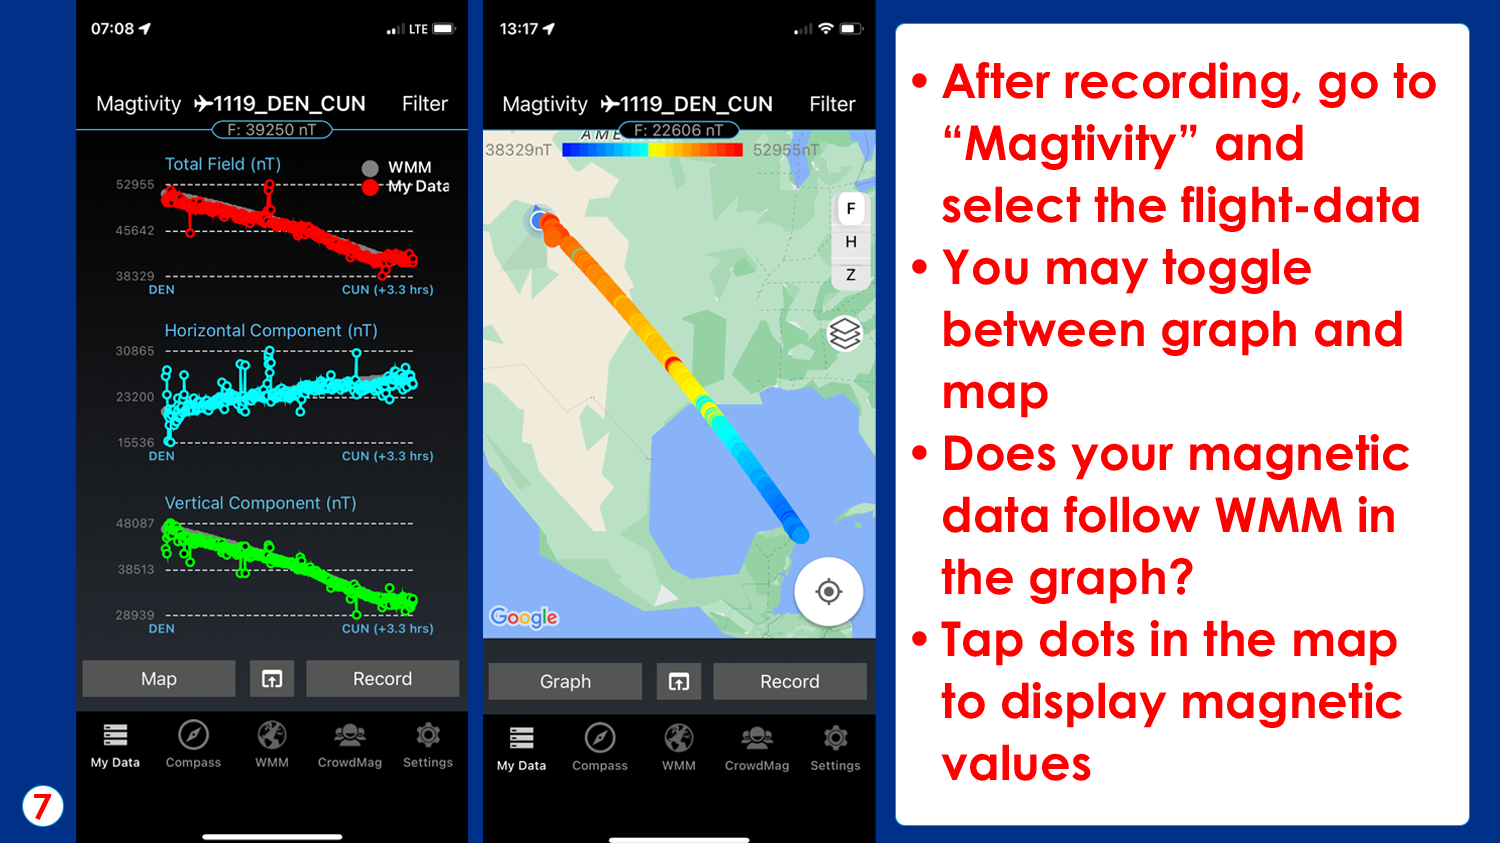 Screenshot of flight data recordings and screenshot of summary of map tracking flight. Text reads, After recording, go to "Magtivity" and select the flight-data. You may toggle between the graph and map. Does your magnetic data follow WMM in the graph? Tap dots in the map to display magnetic values.